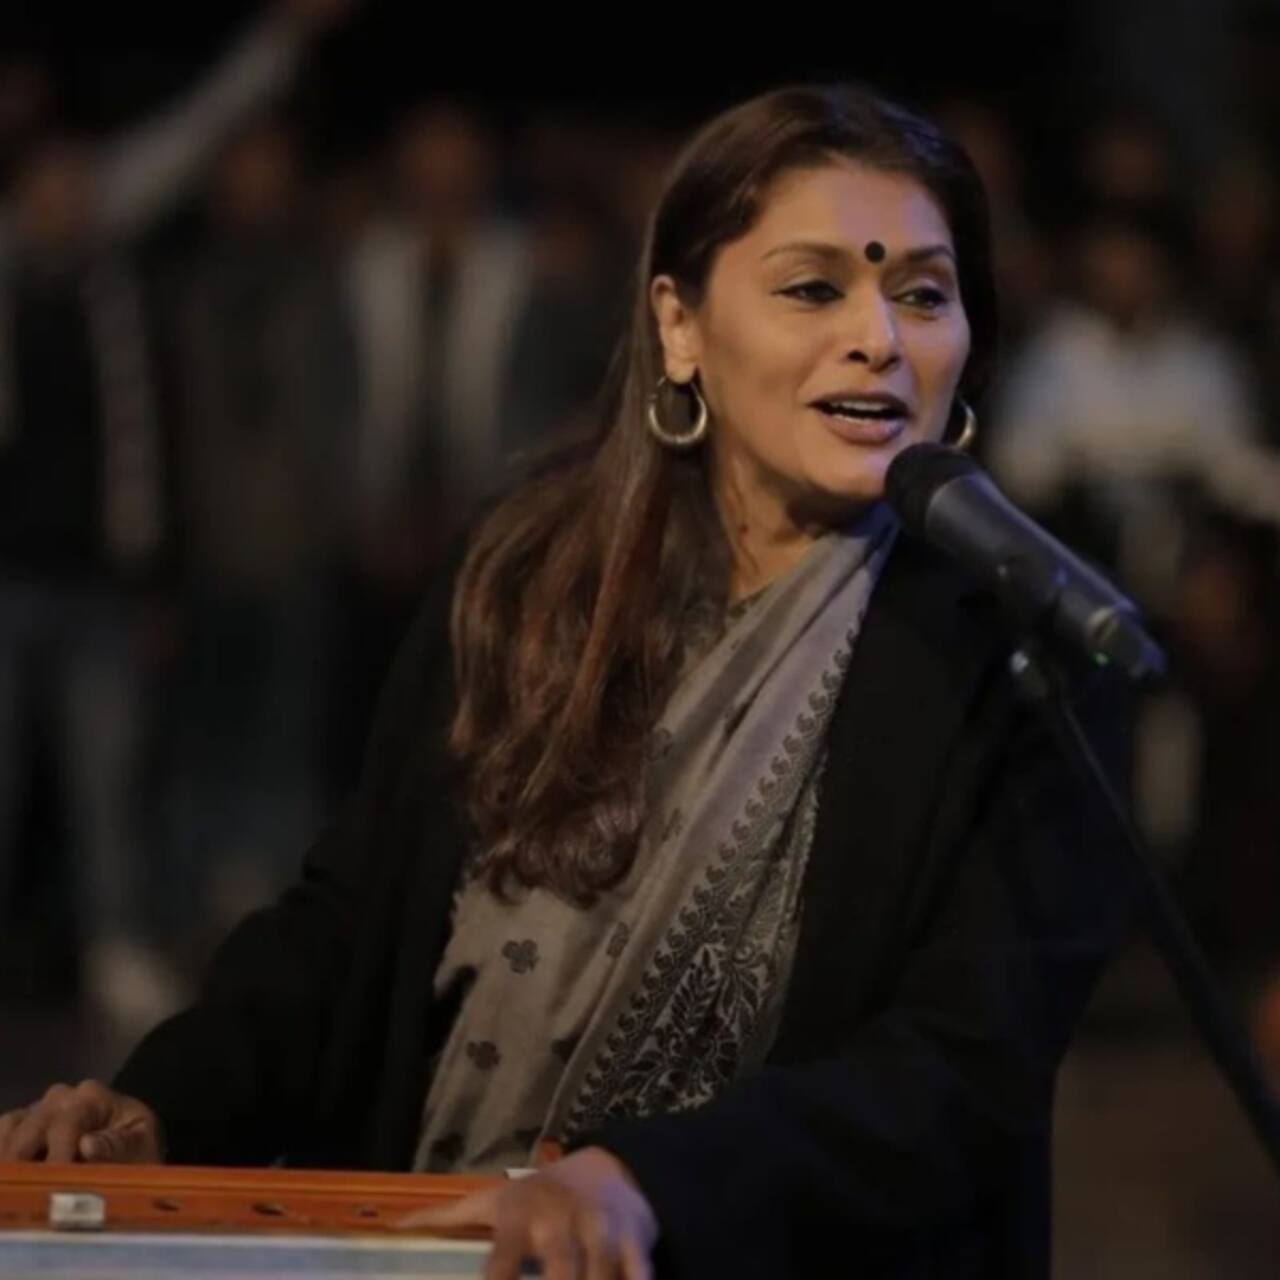 The Kashmir Files producer and actress Pallavi Joshi reveals Bollywood movies aren't working because 'India's problems don't feature in them anymore'